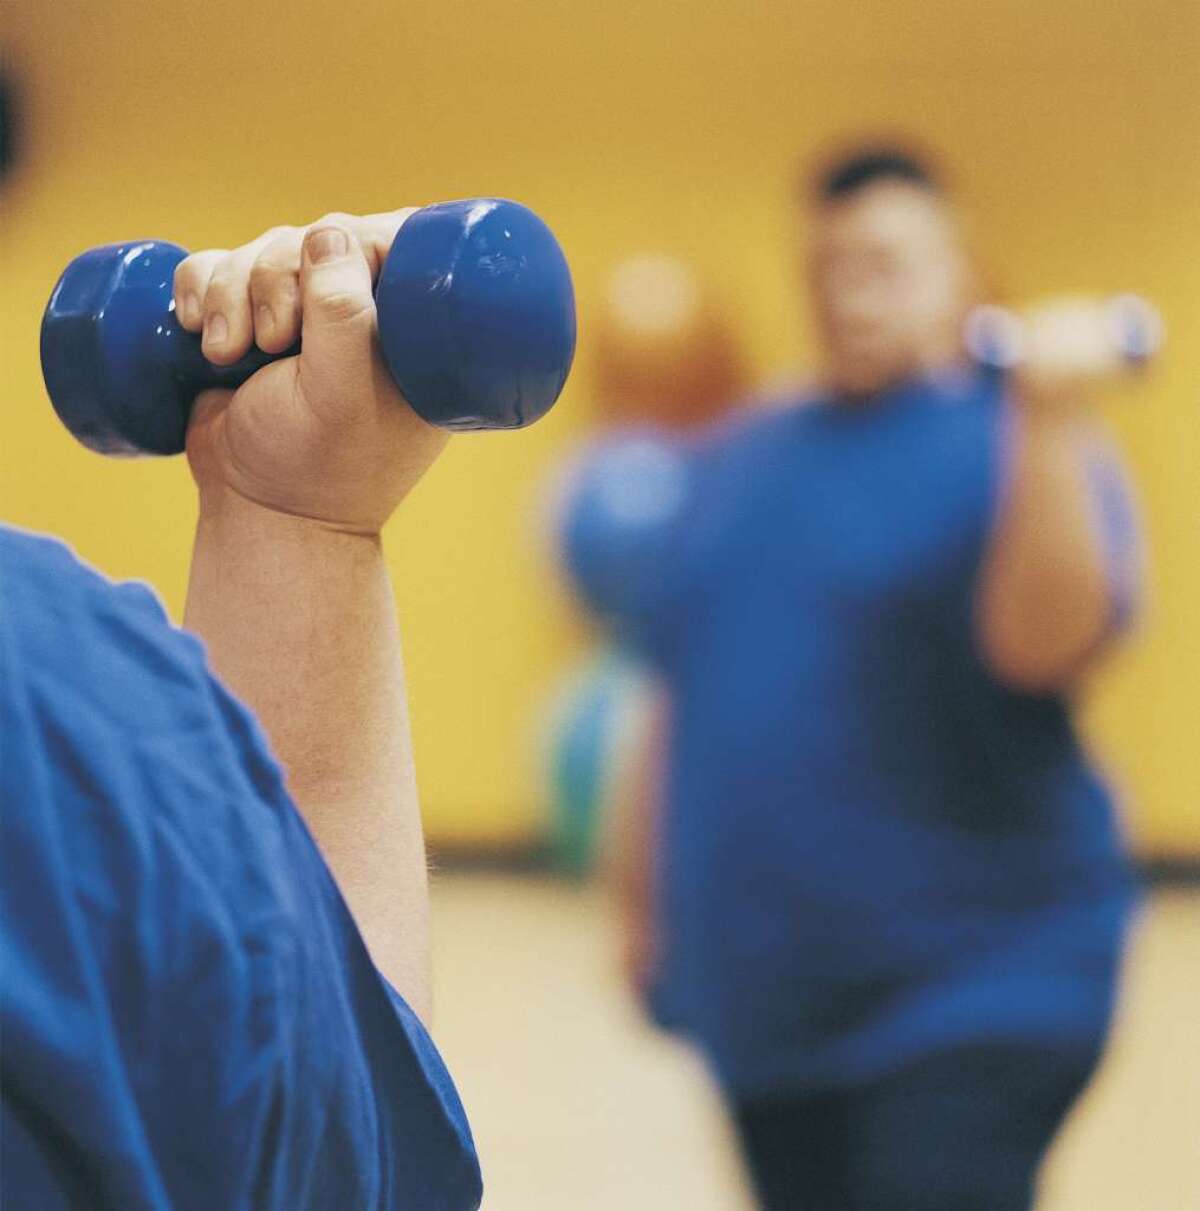 Is working out not shaping you up? New research finds that women who carry a host of genetic variations associated with obesity are resistant to resistance training.